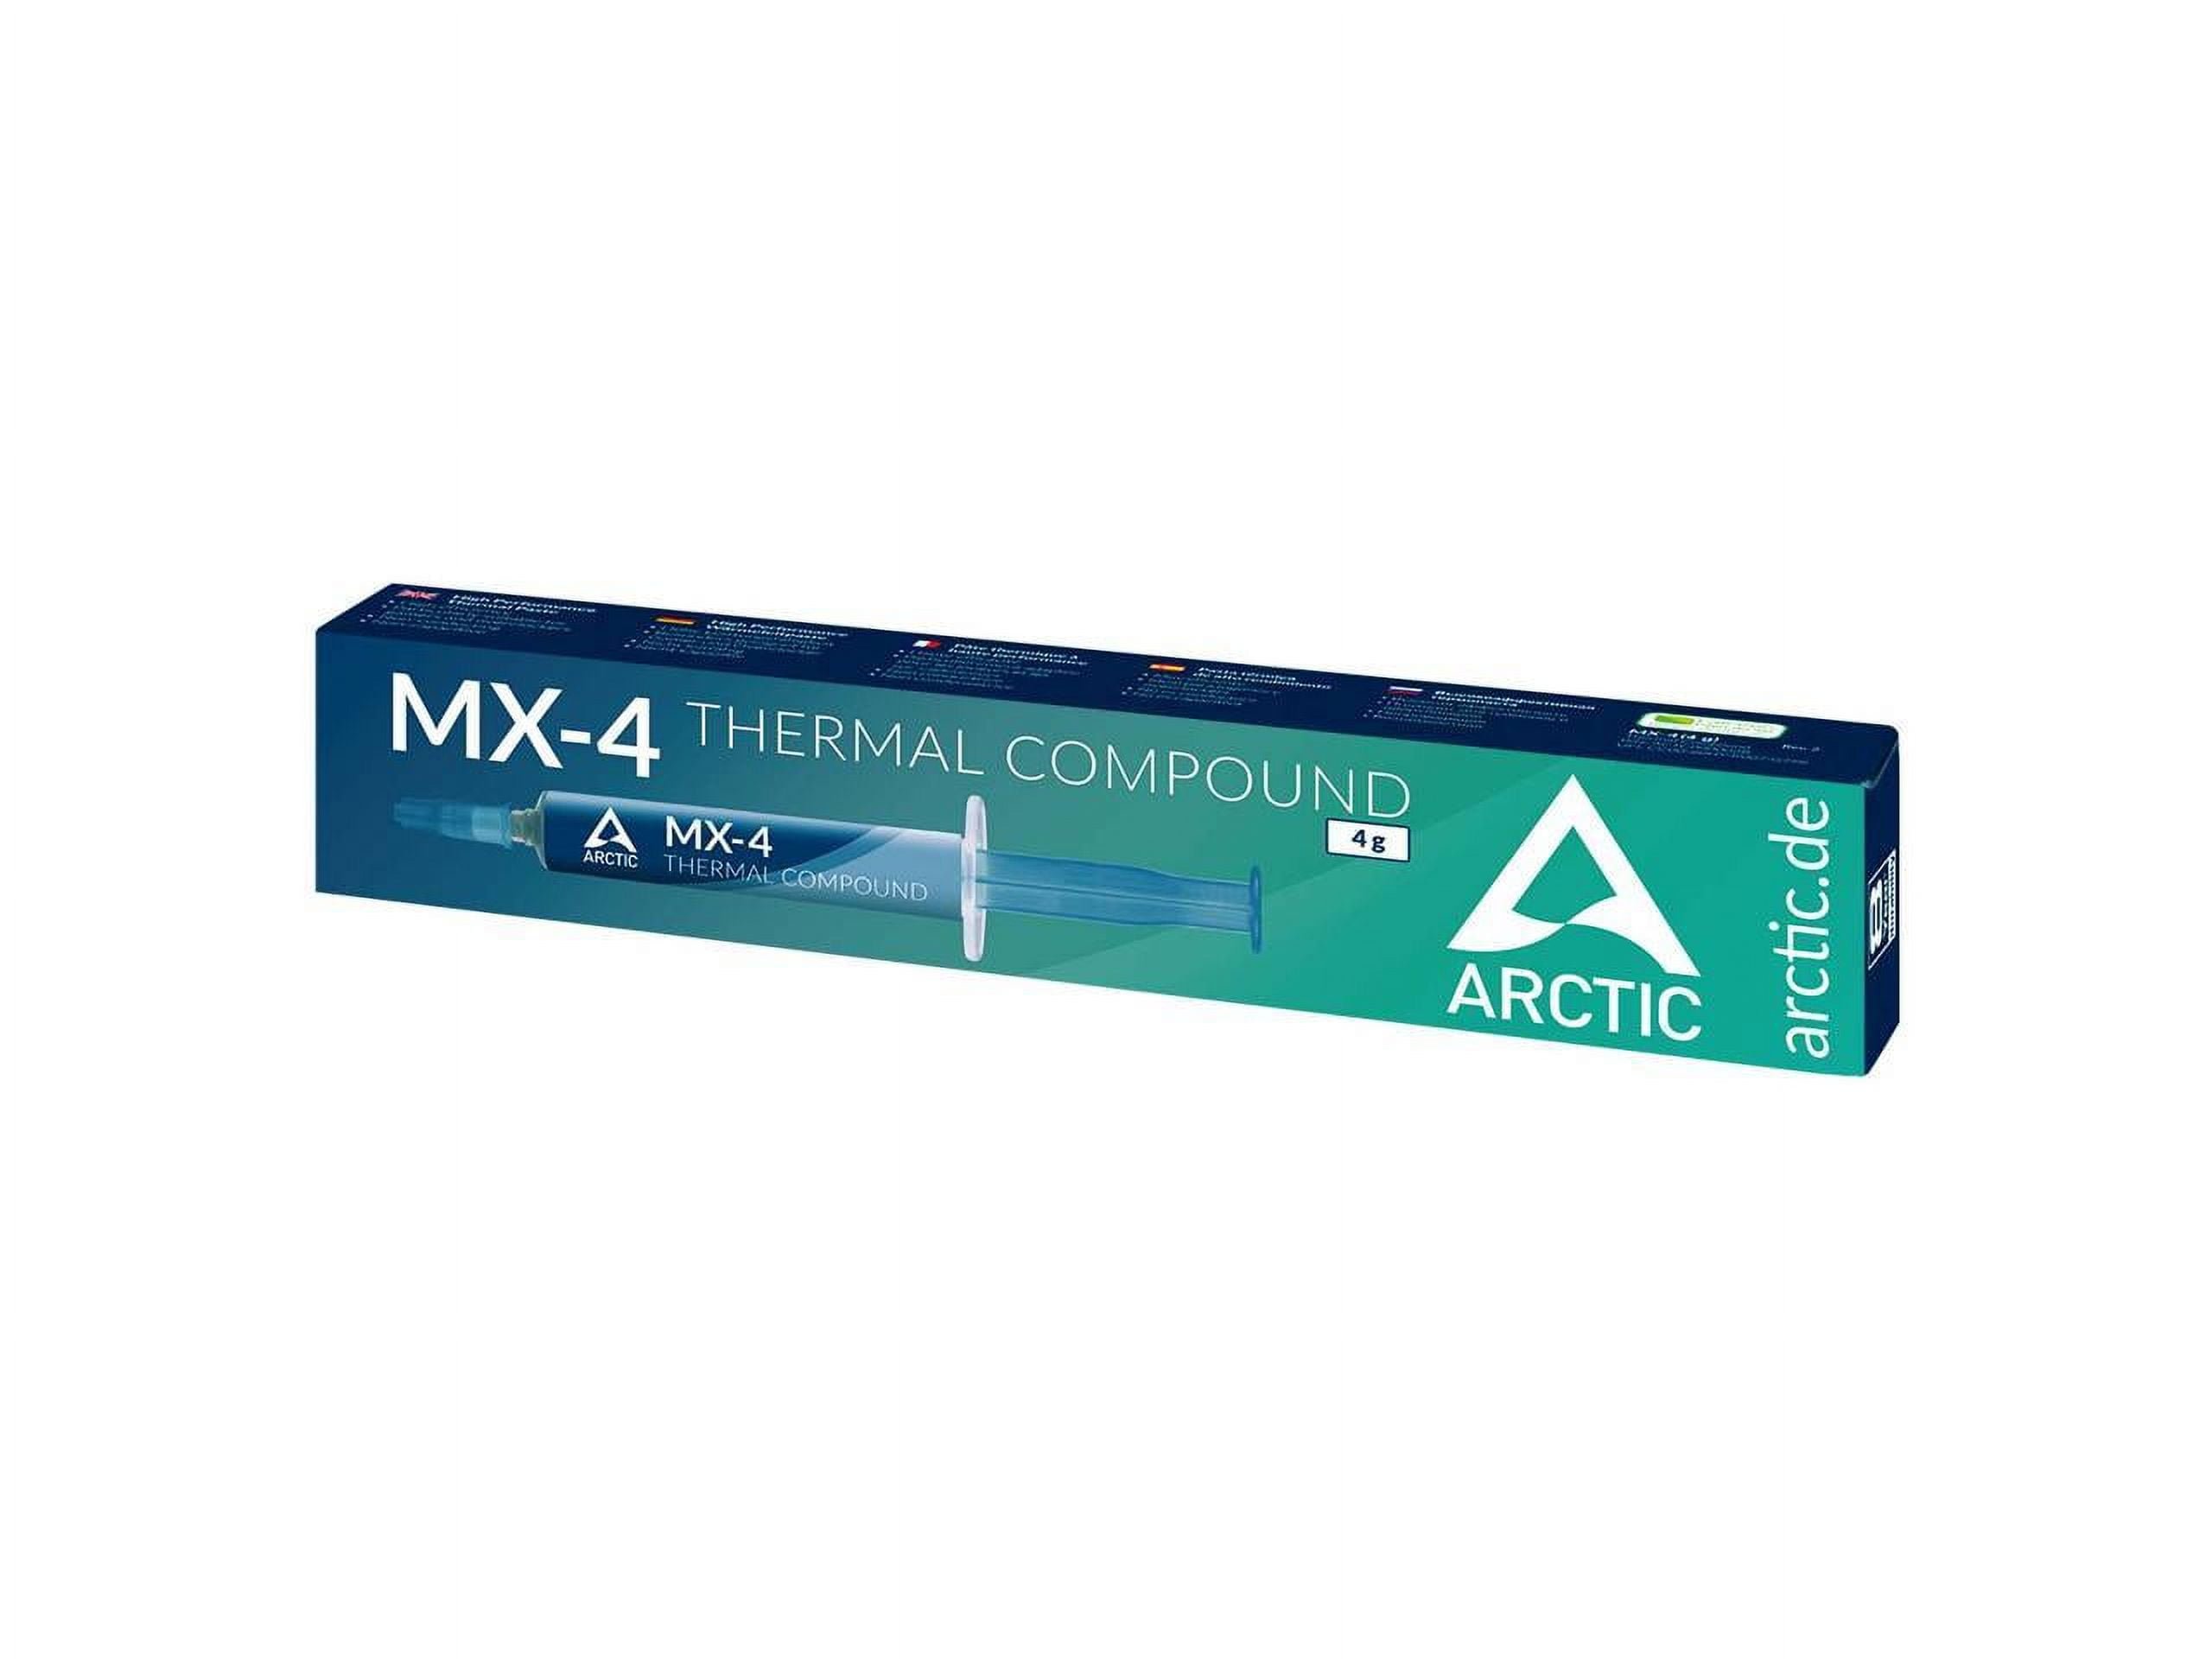 ARCTIC MX-4 Thermal Paste, Carbon Based High Performance Thermal